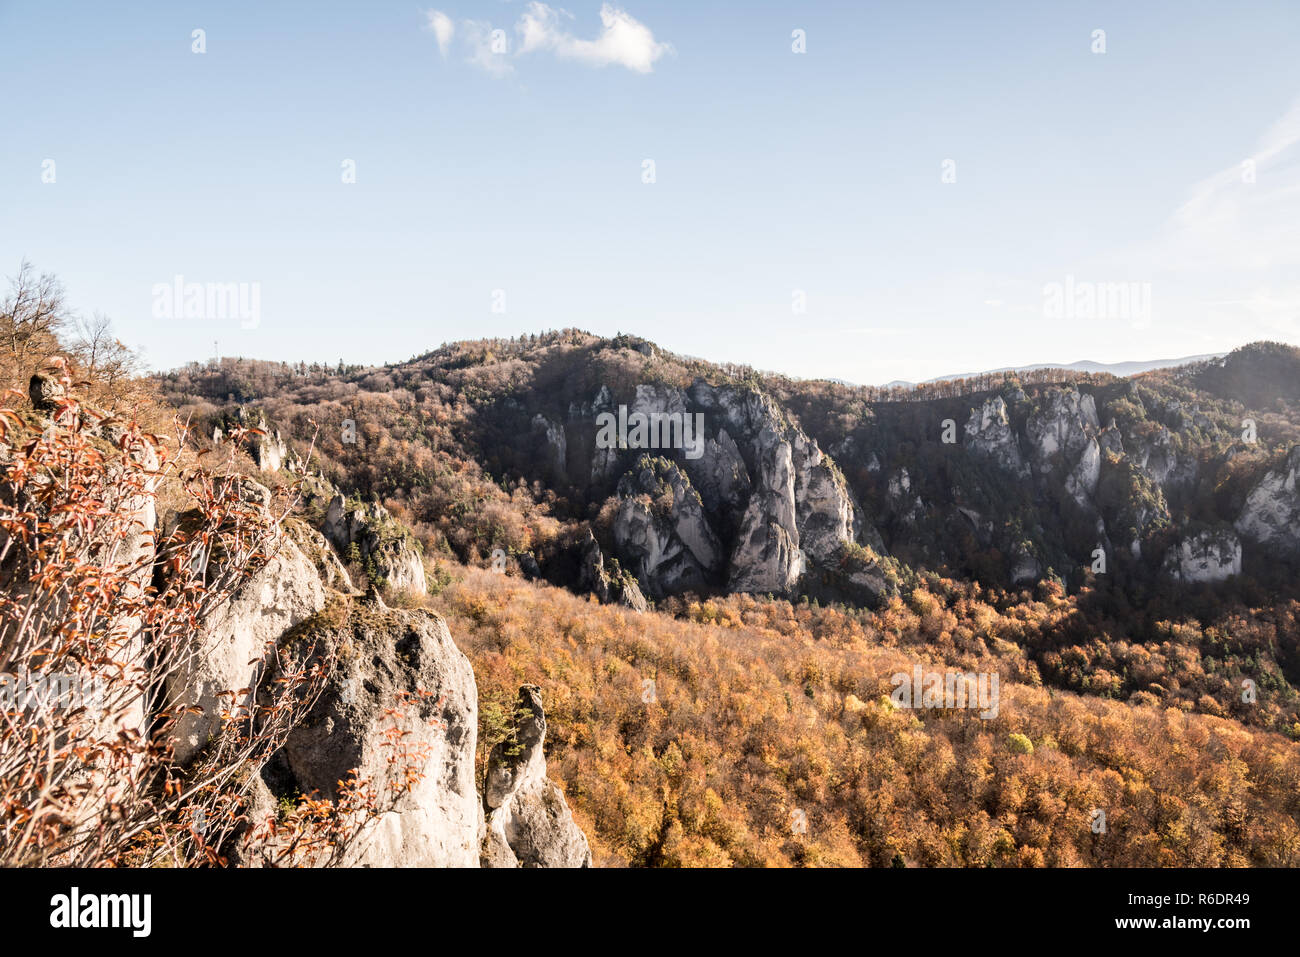 Sulovske skaly mountains in Slovakia with rocks, colorful forest and blue sky during nice autumn day Stock Photo